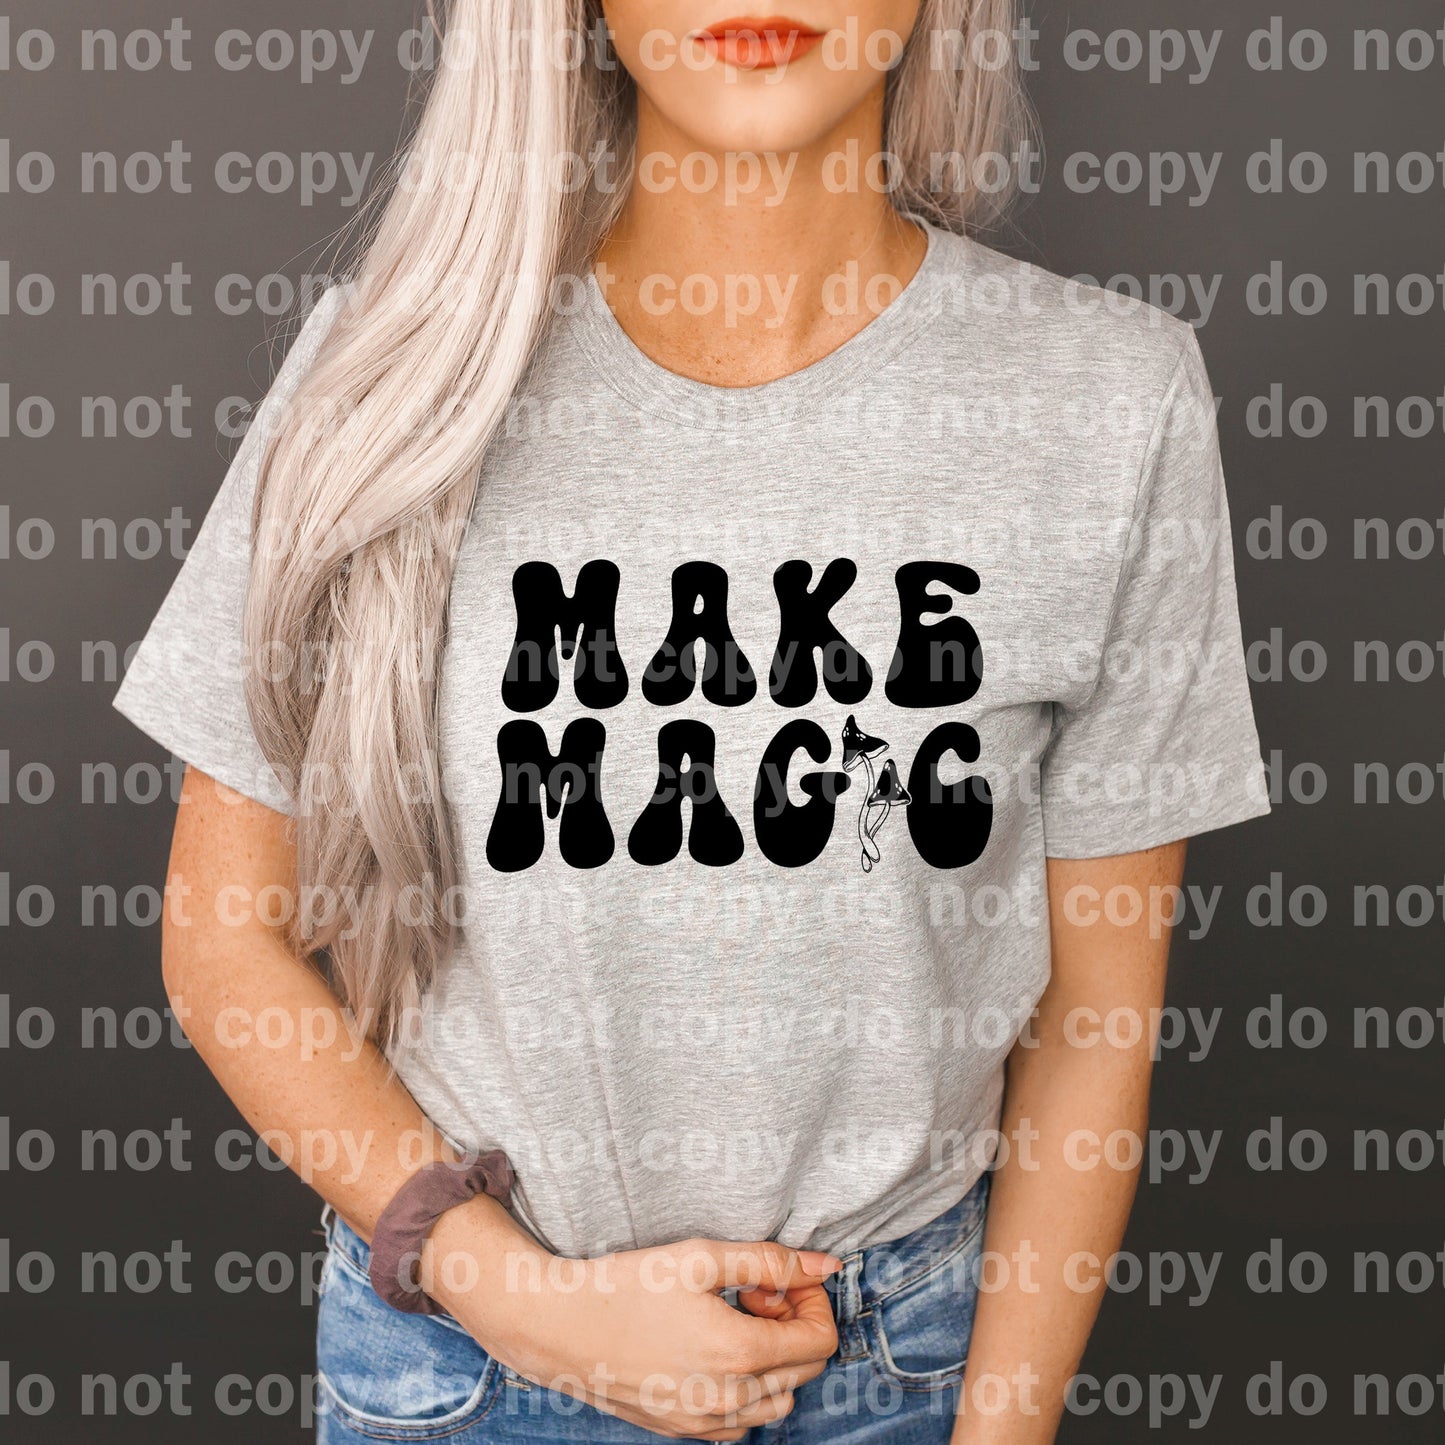 Make Magic Full Color/One Color Dream Print or Sublimation Print